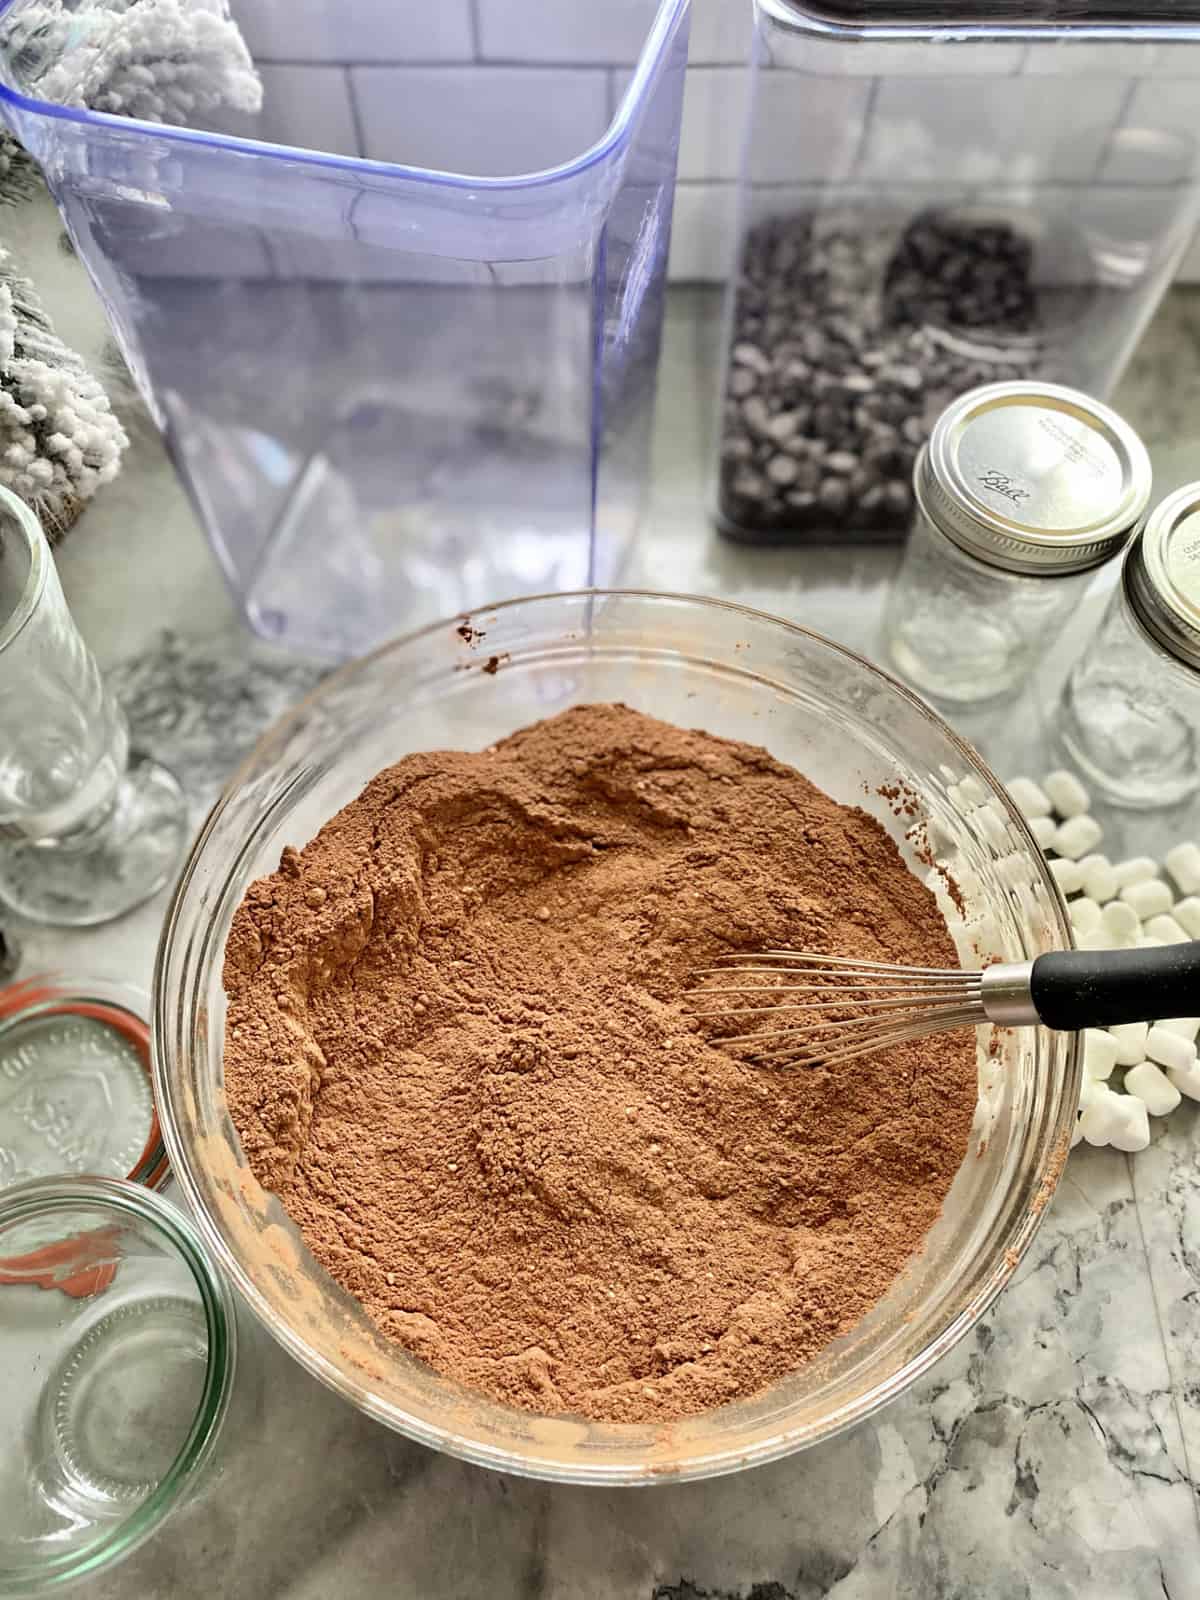 Glass bowl filled of cocoa mix with a whisk in the powder mixture.